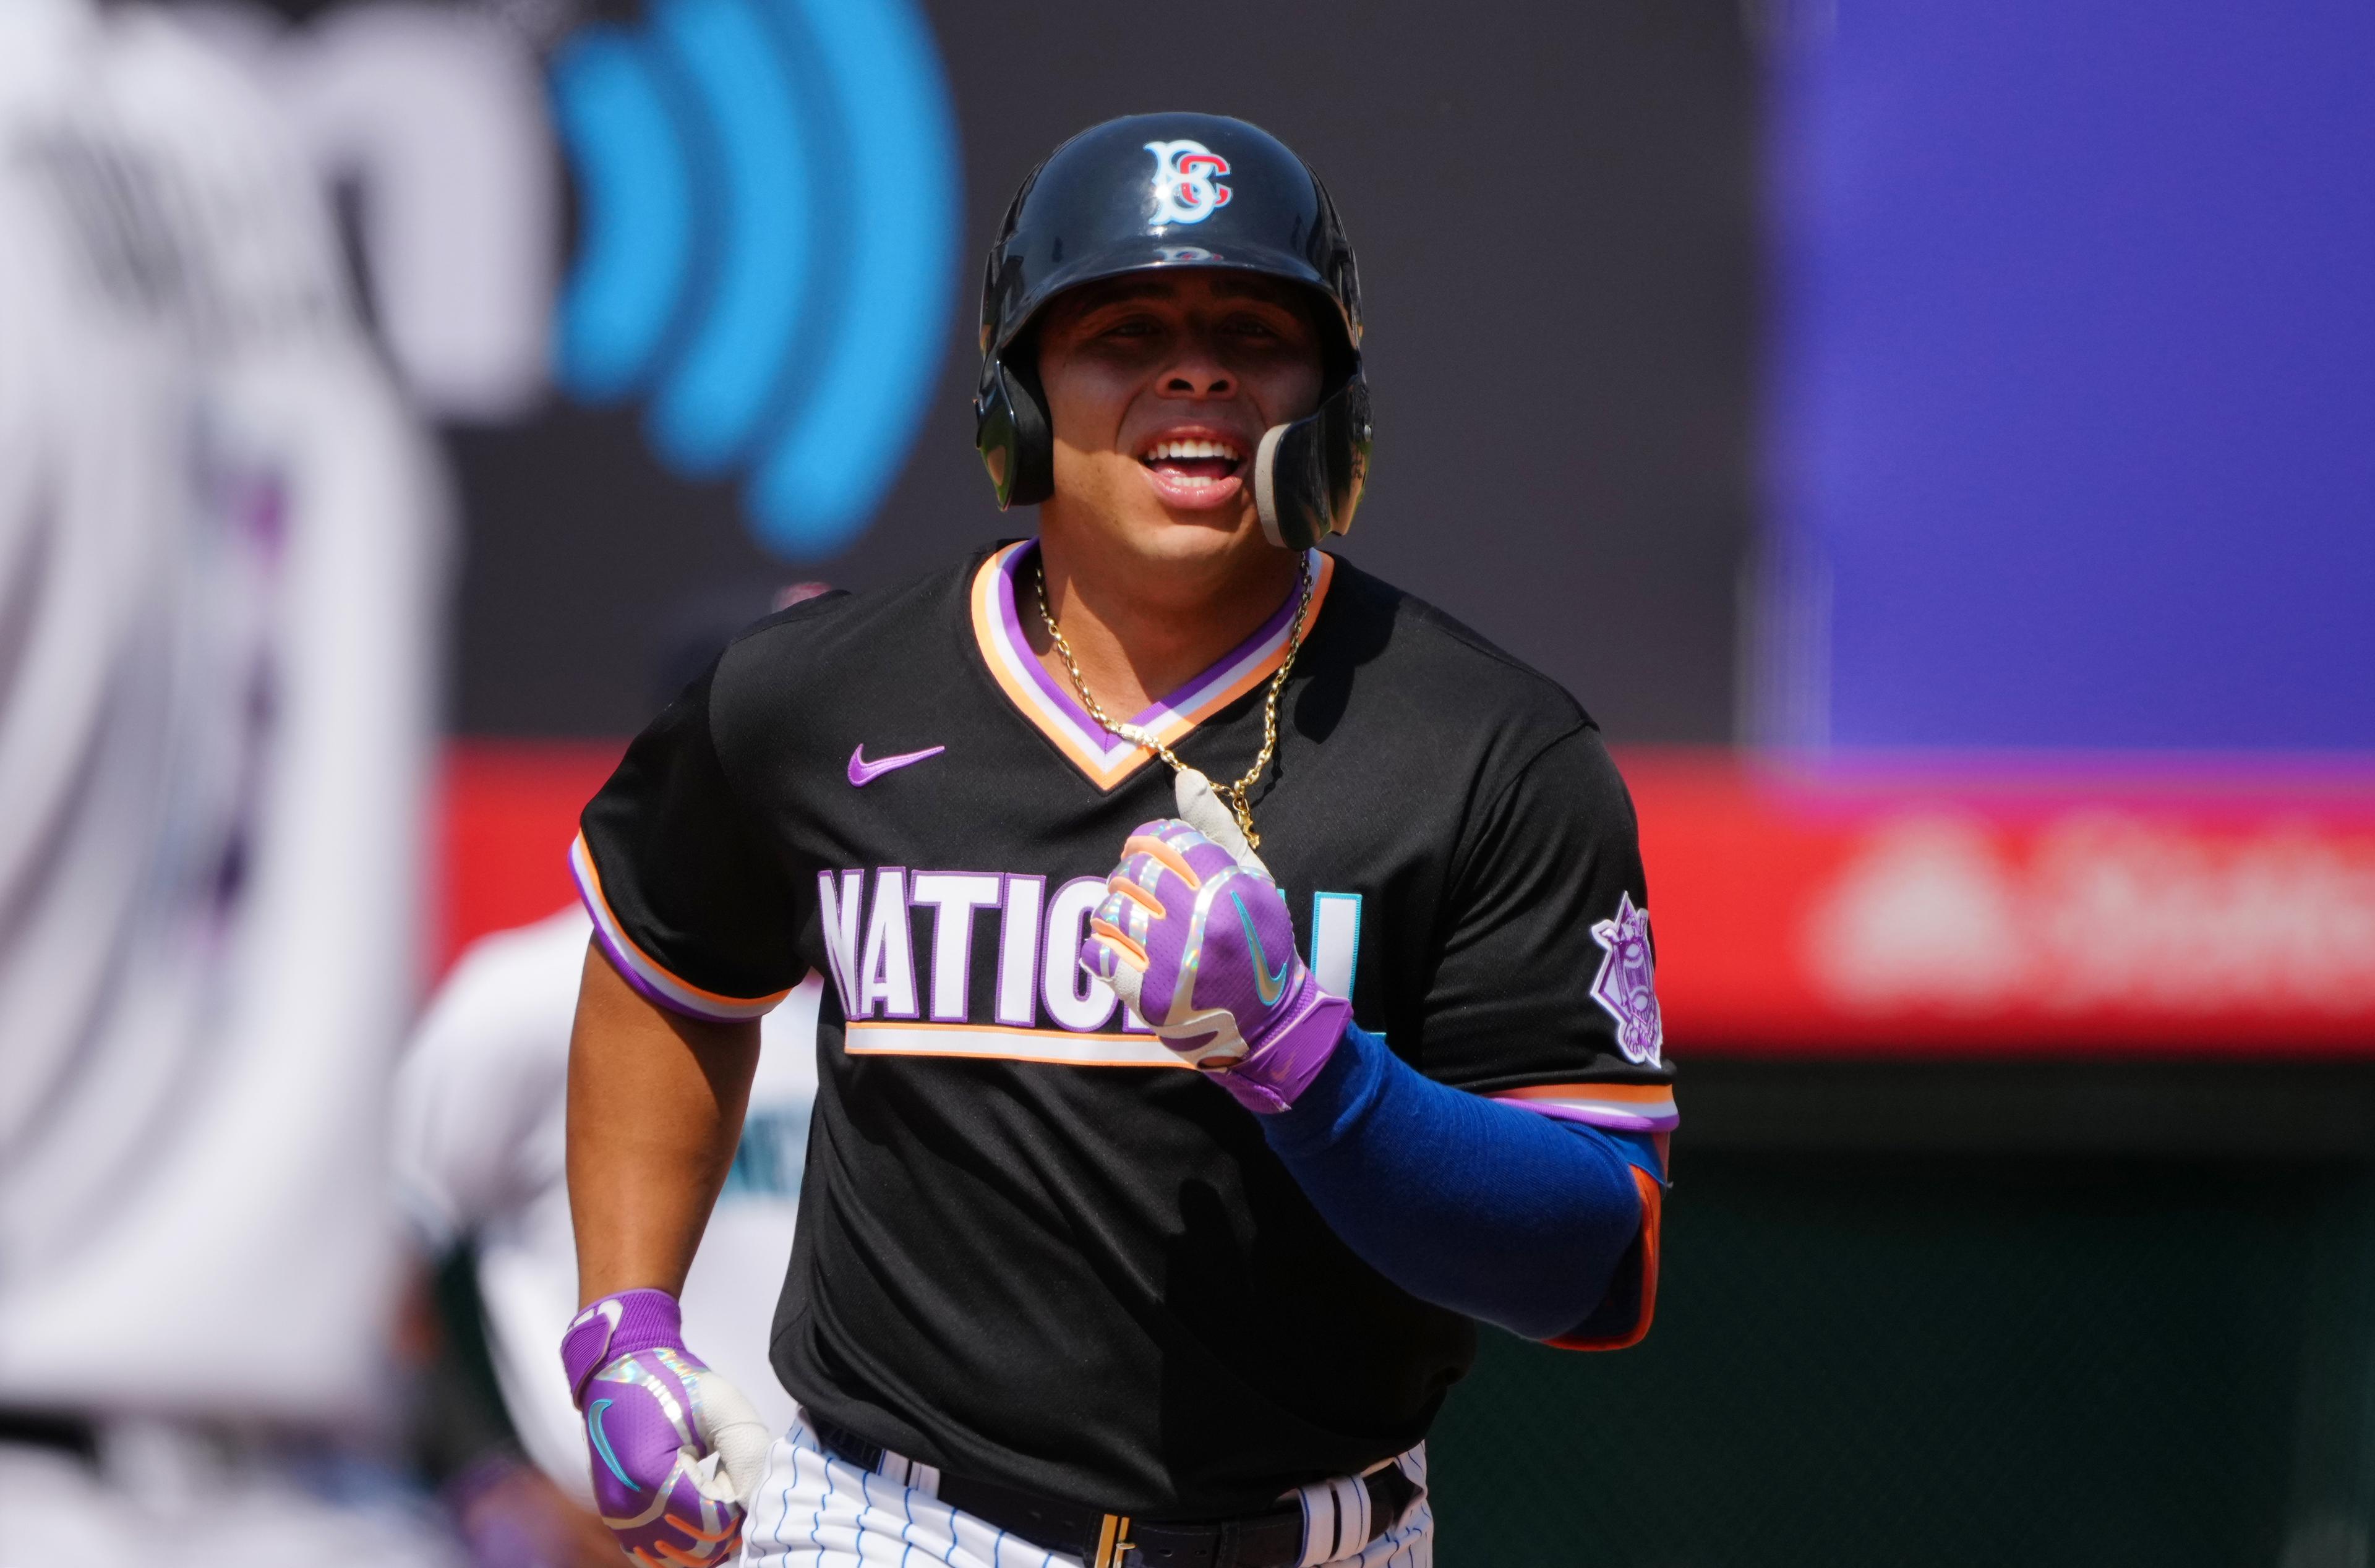 Jul 11, 2021; Denver, CO, USA; National League infielder Francisco Alvarez (30) rounds the bases after hitting a solo home run in the fifth inning against the American League of the 2021 MLB All Star Futures Game at Coors Field. Mandatory Credit: Ron Chenoy-USA TODAY Sports / © Ron Chenoy-USA TODAY Sports